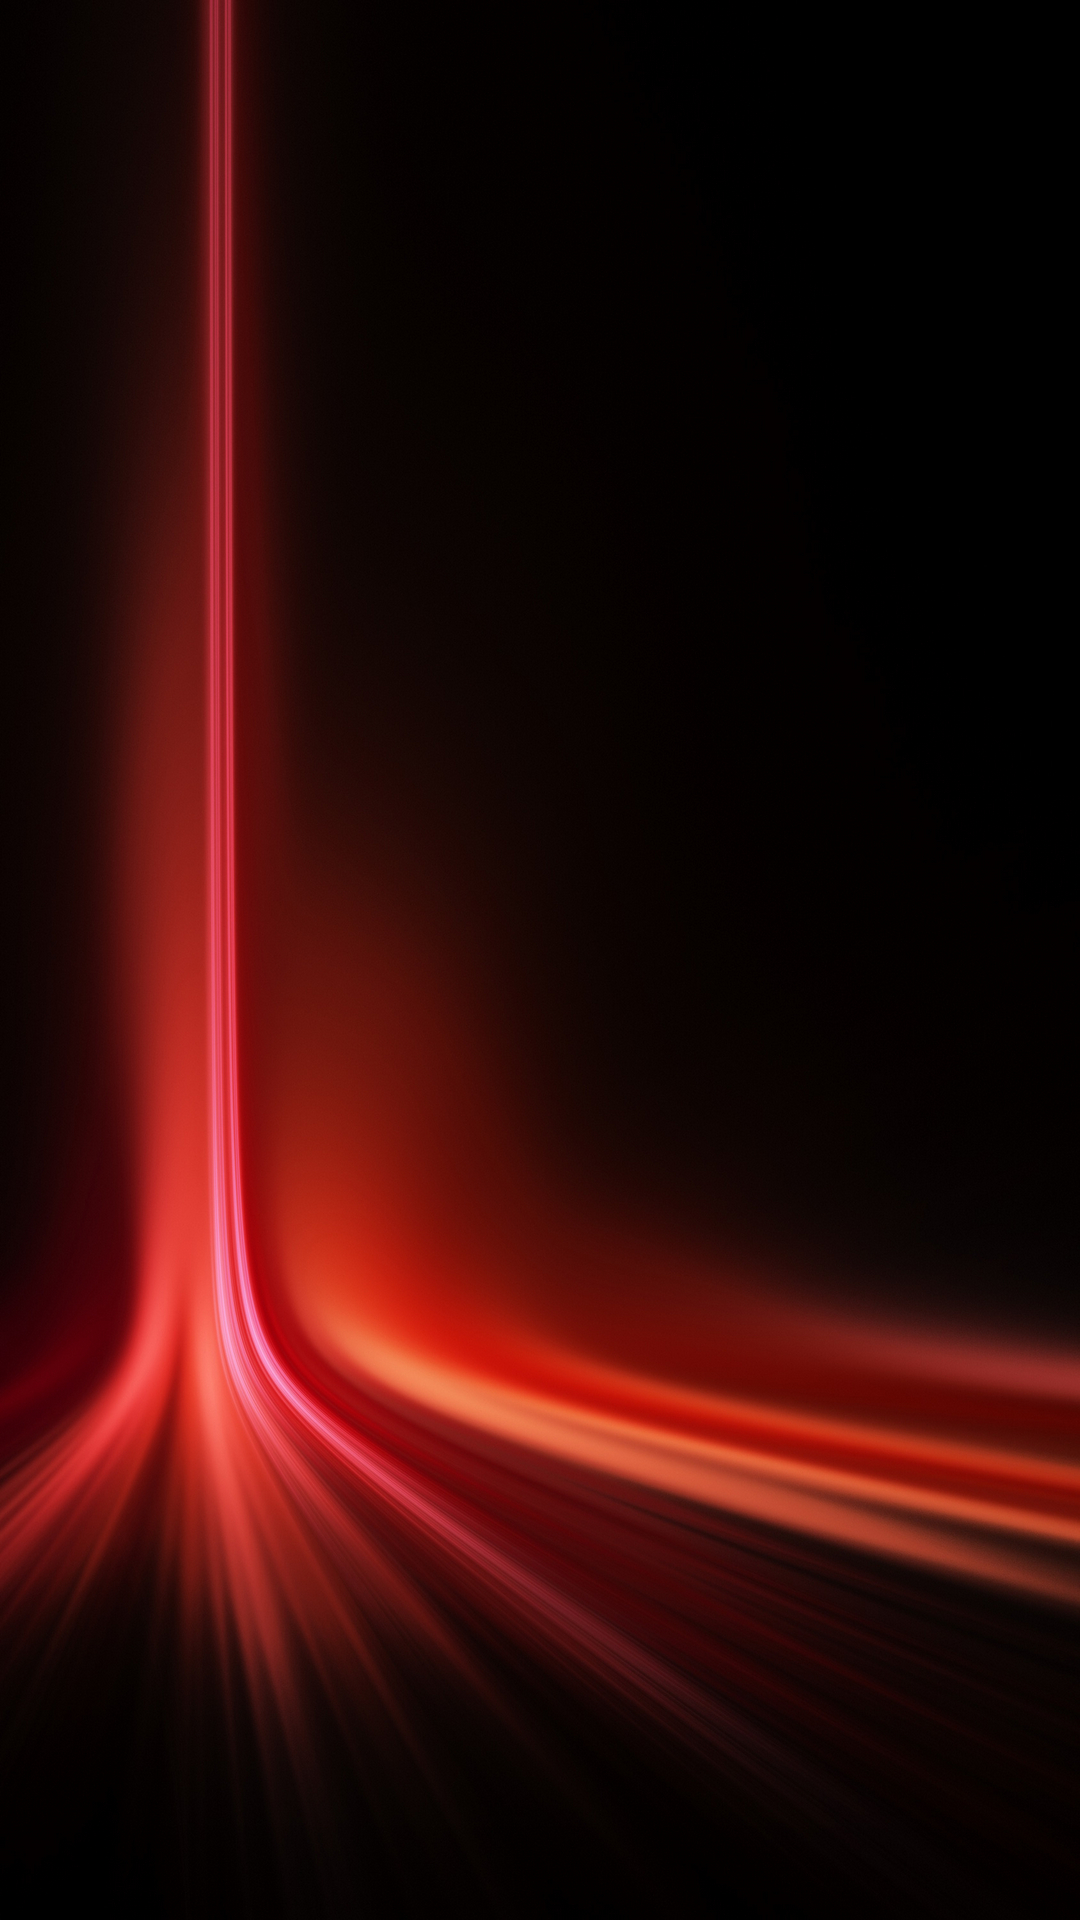 Vertical Red Laser Light Spread Android Wallpaper free download